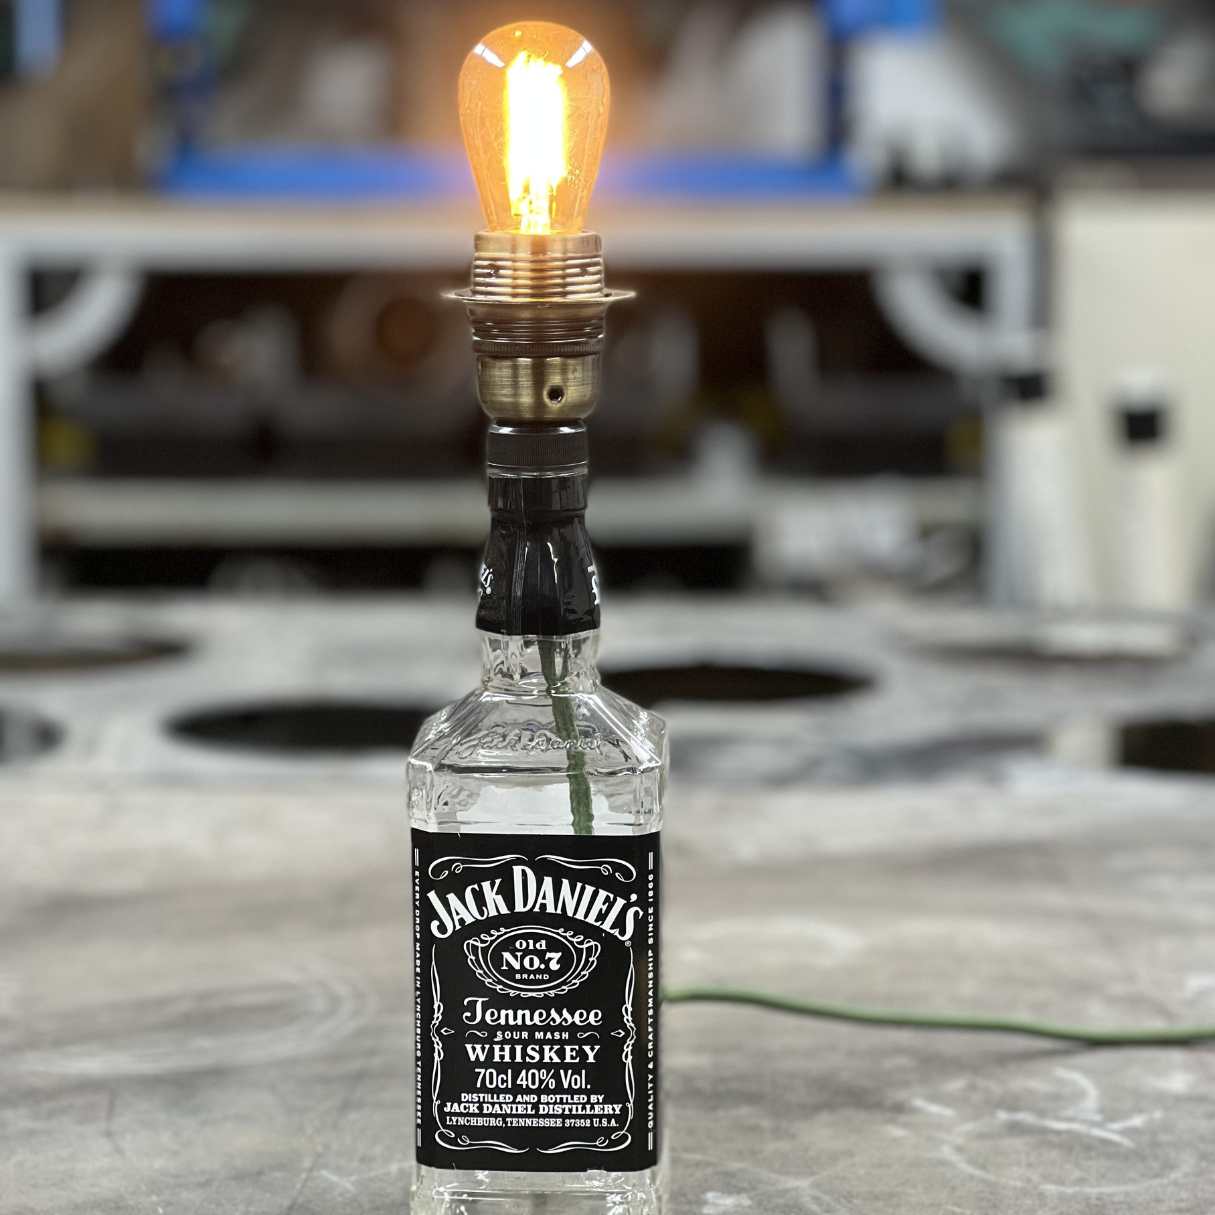 How To Make A Lamp Out Of A Liquor Bottle